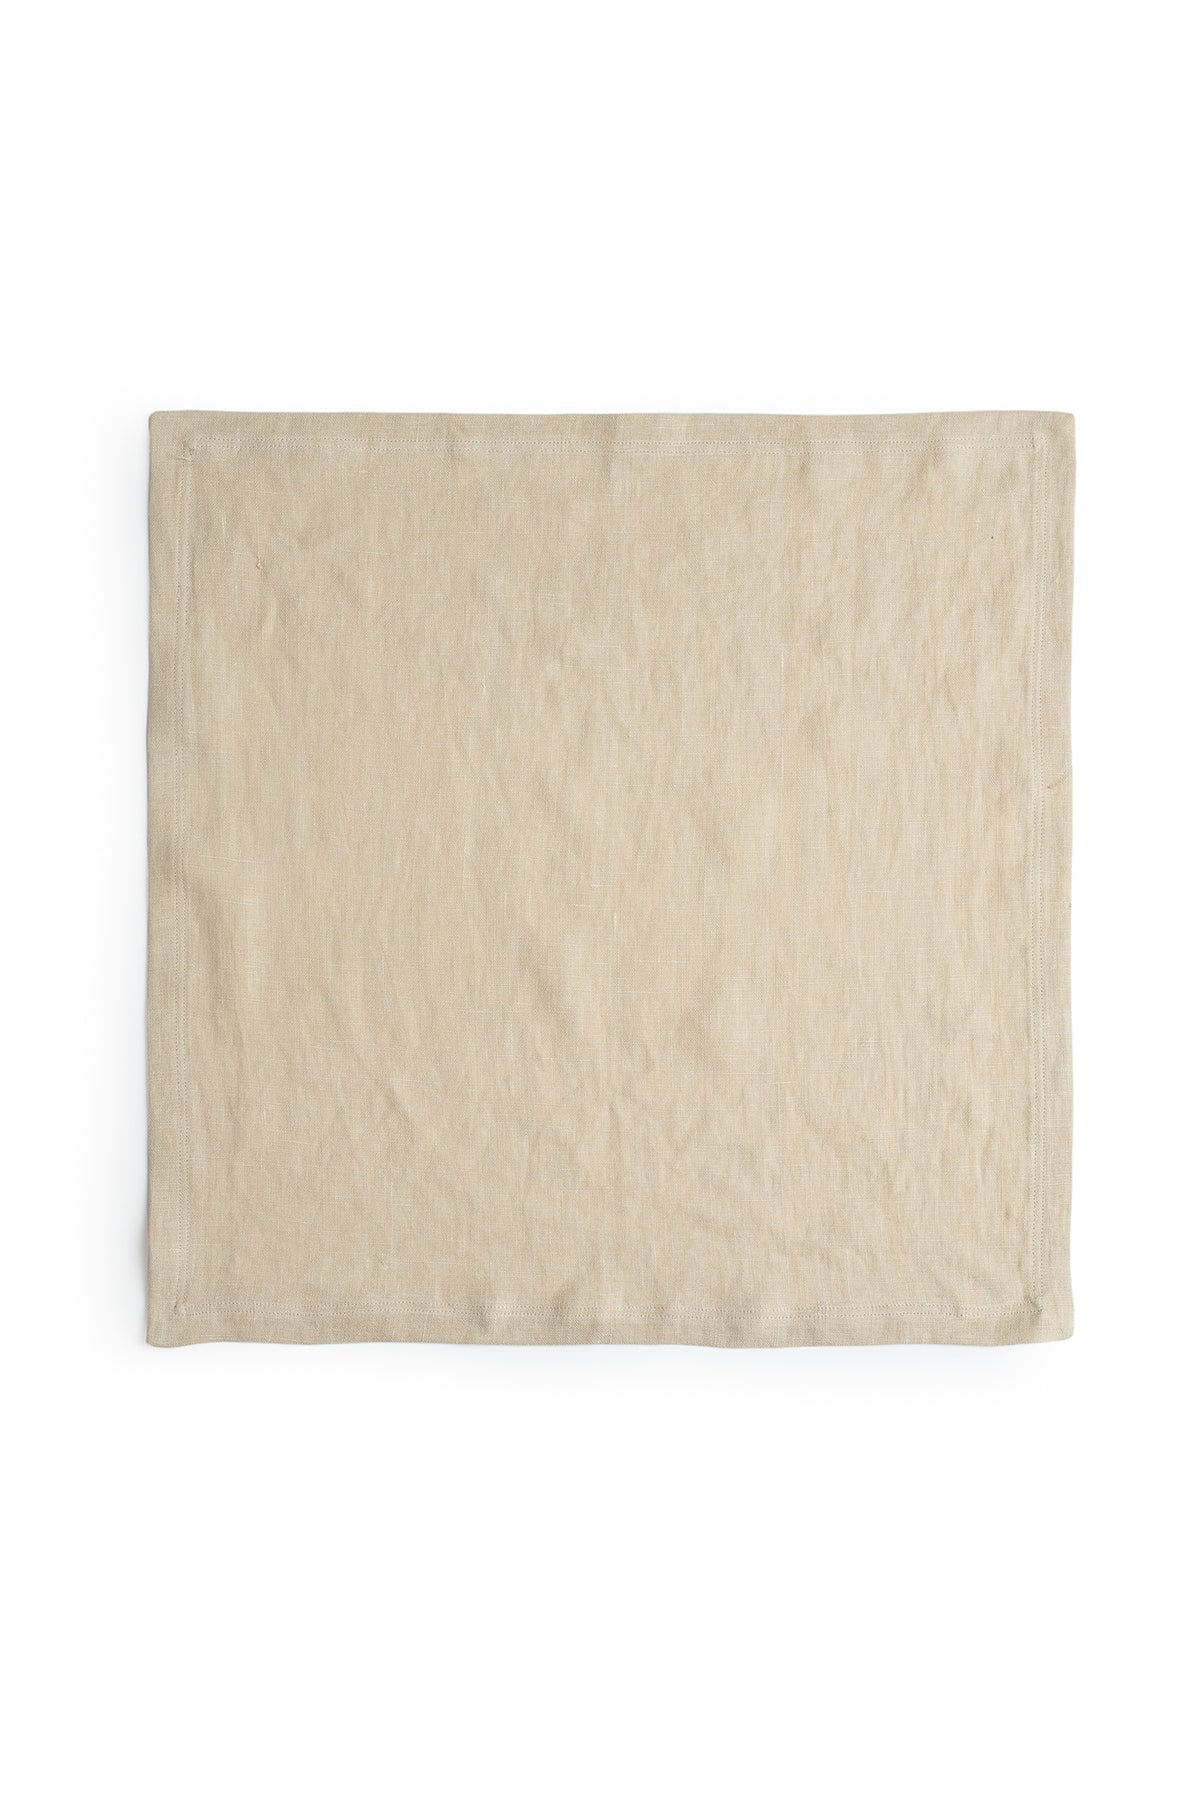 A beige linen napkin with a luxe finish on a white background from Jenny Graham Home.-15073421164737